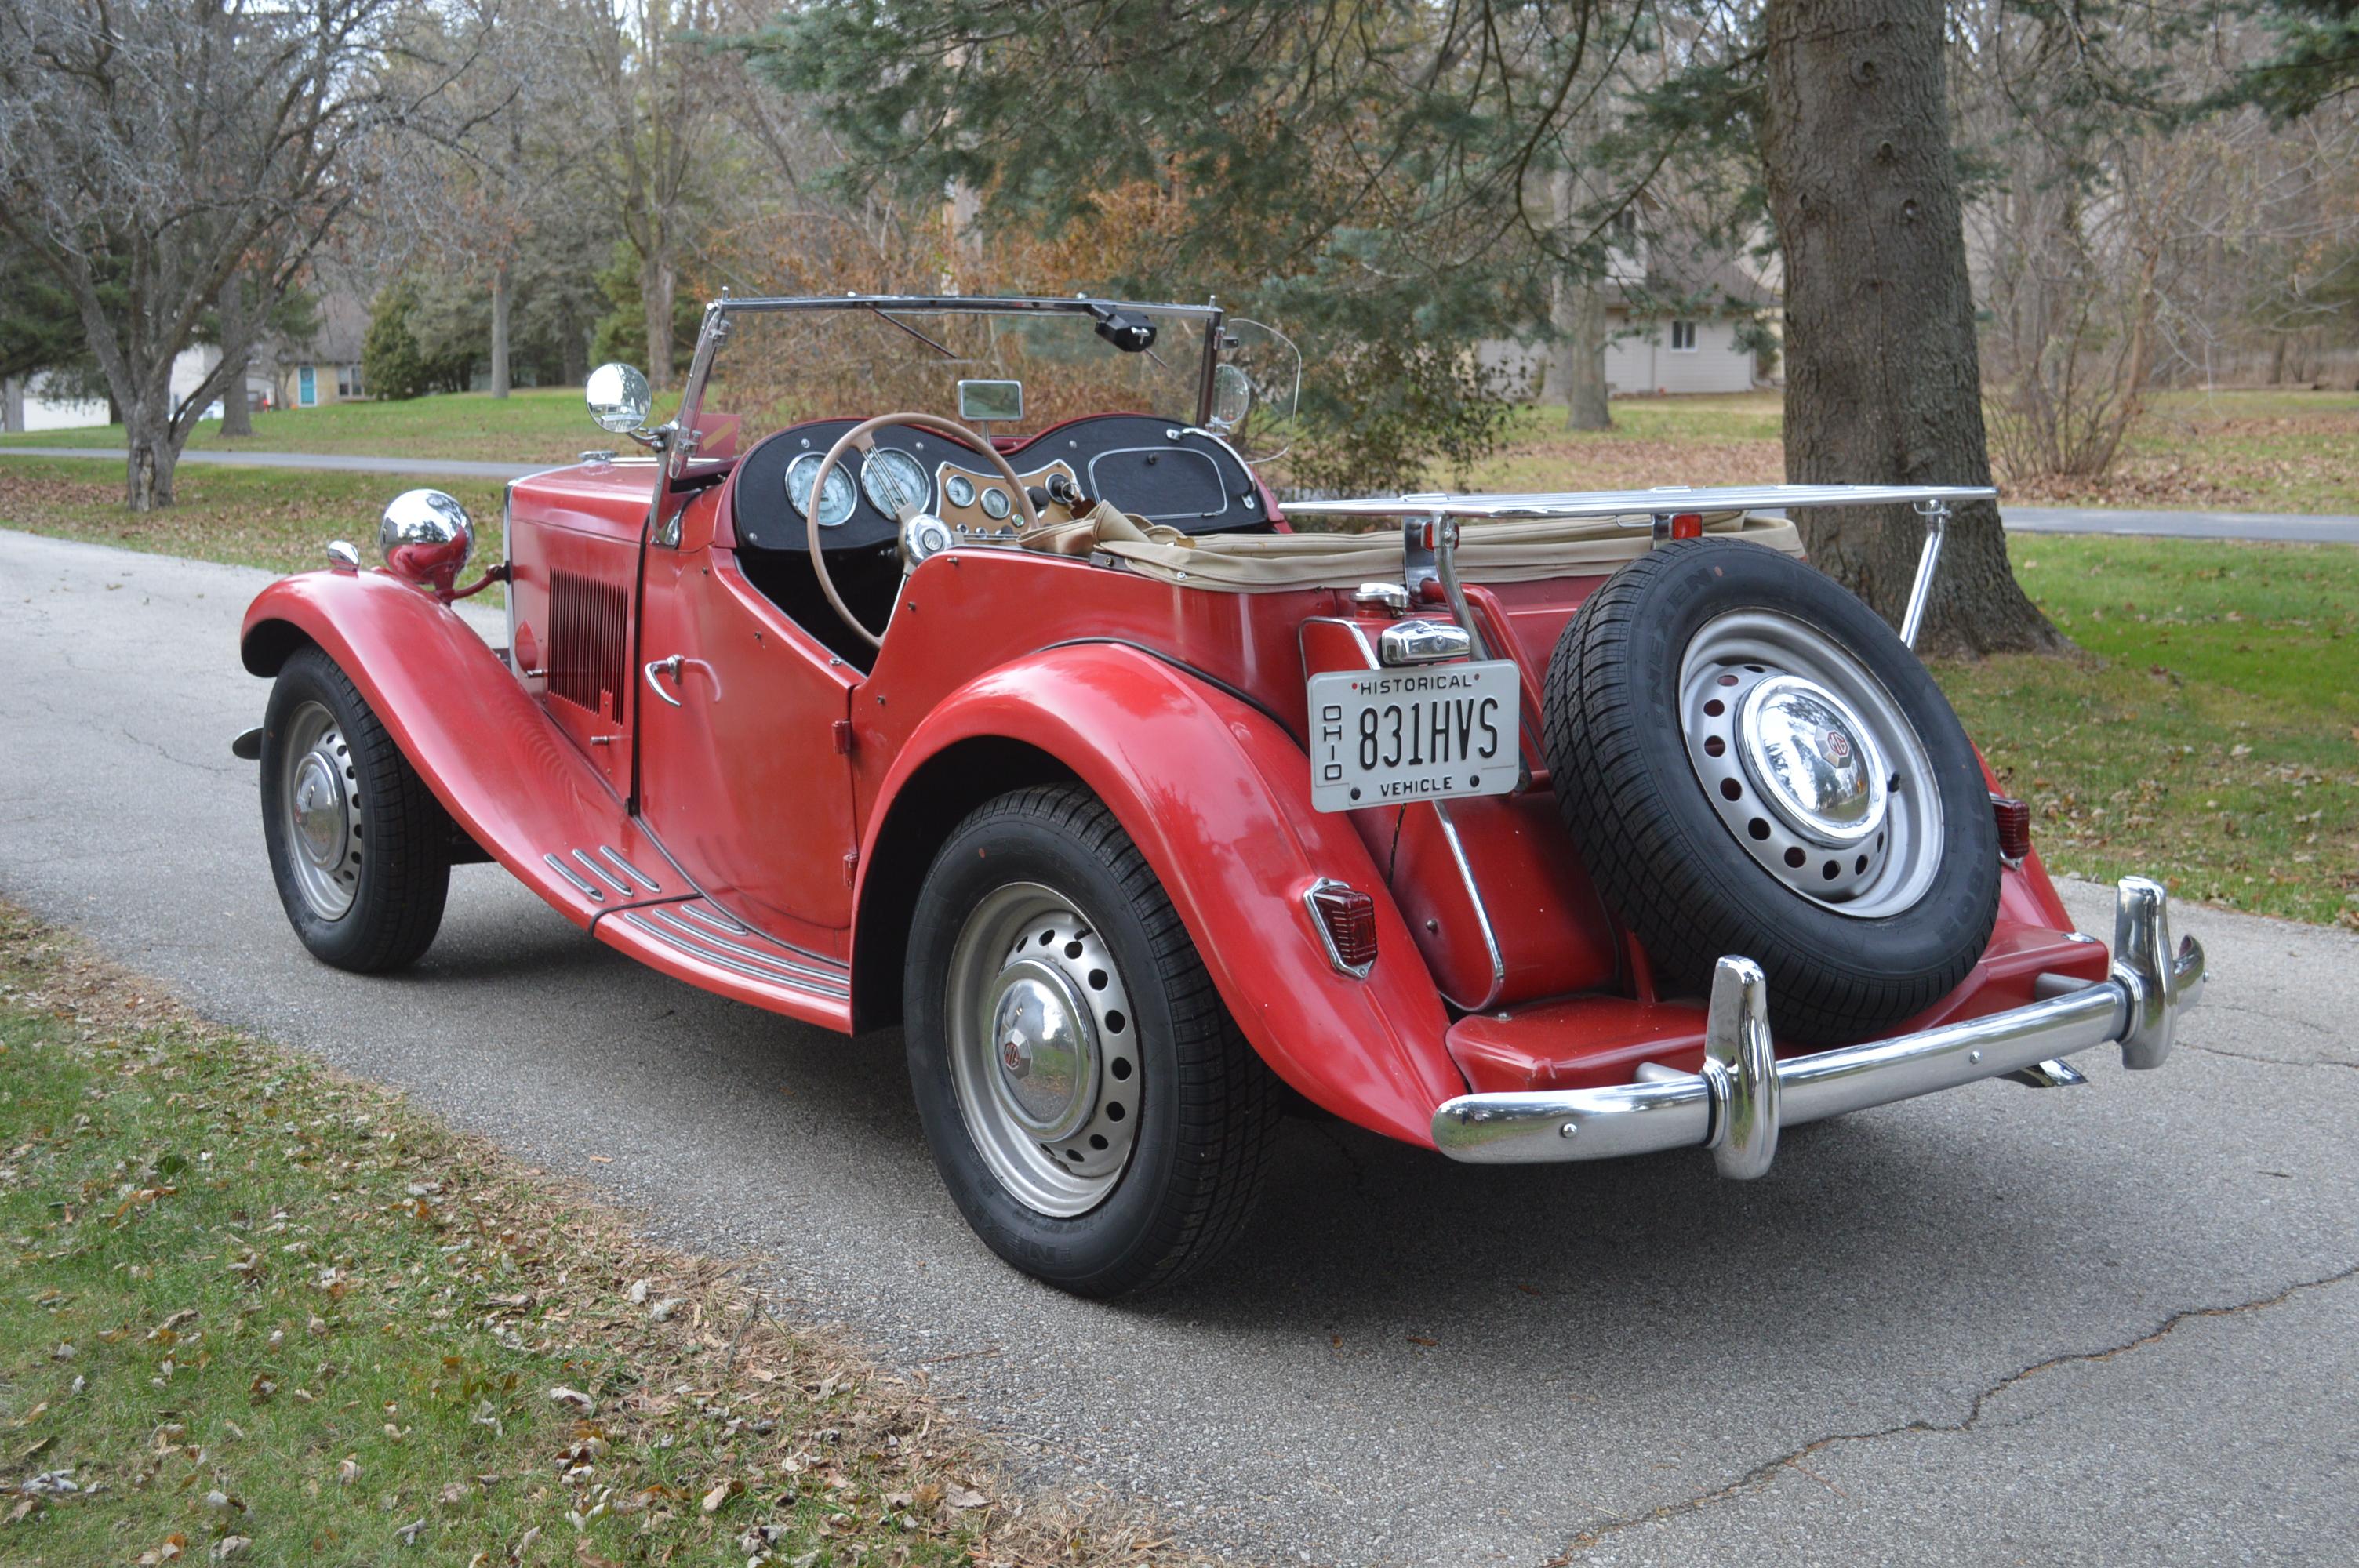 1951 MG TD ROADSTER, RED CLASSIC VINTAGE BRITISH SPORT CONVERTIBLE